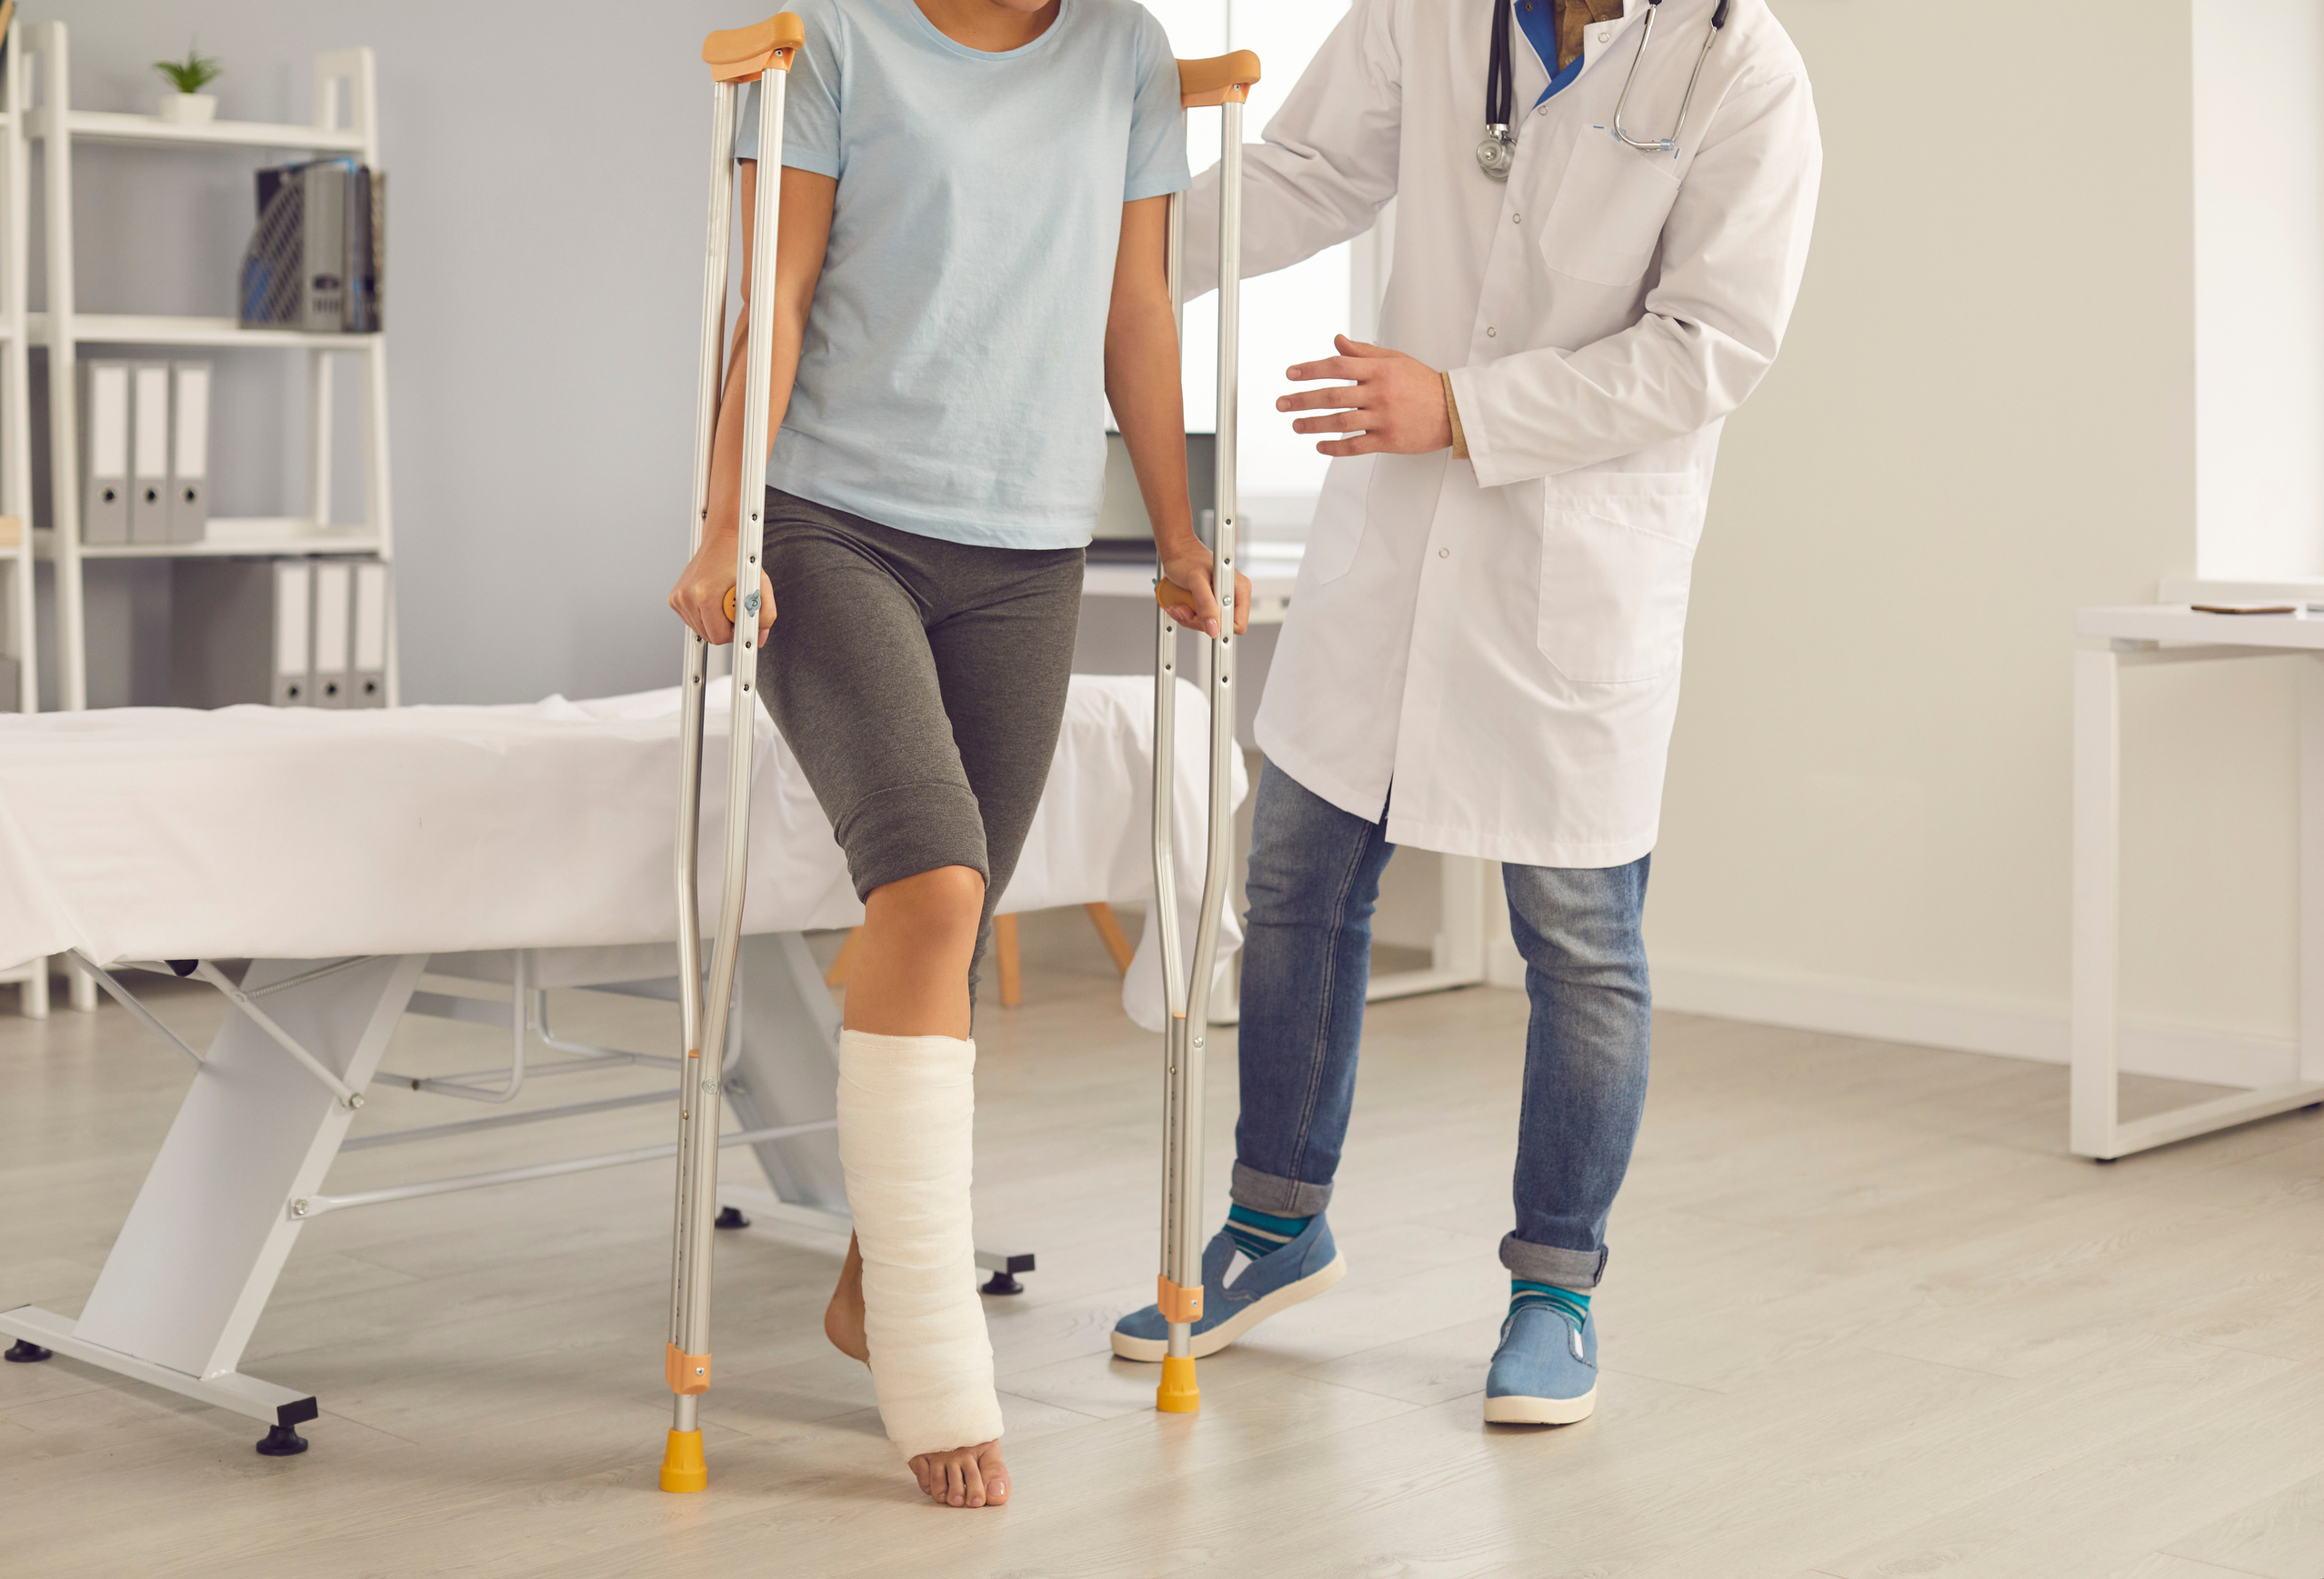 Doctor Supports a Patient with a Broken Leg While Walking on Crutches in a Hospital Office.